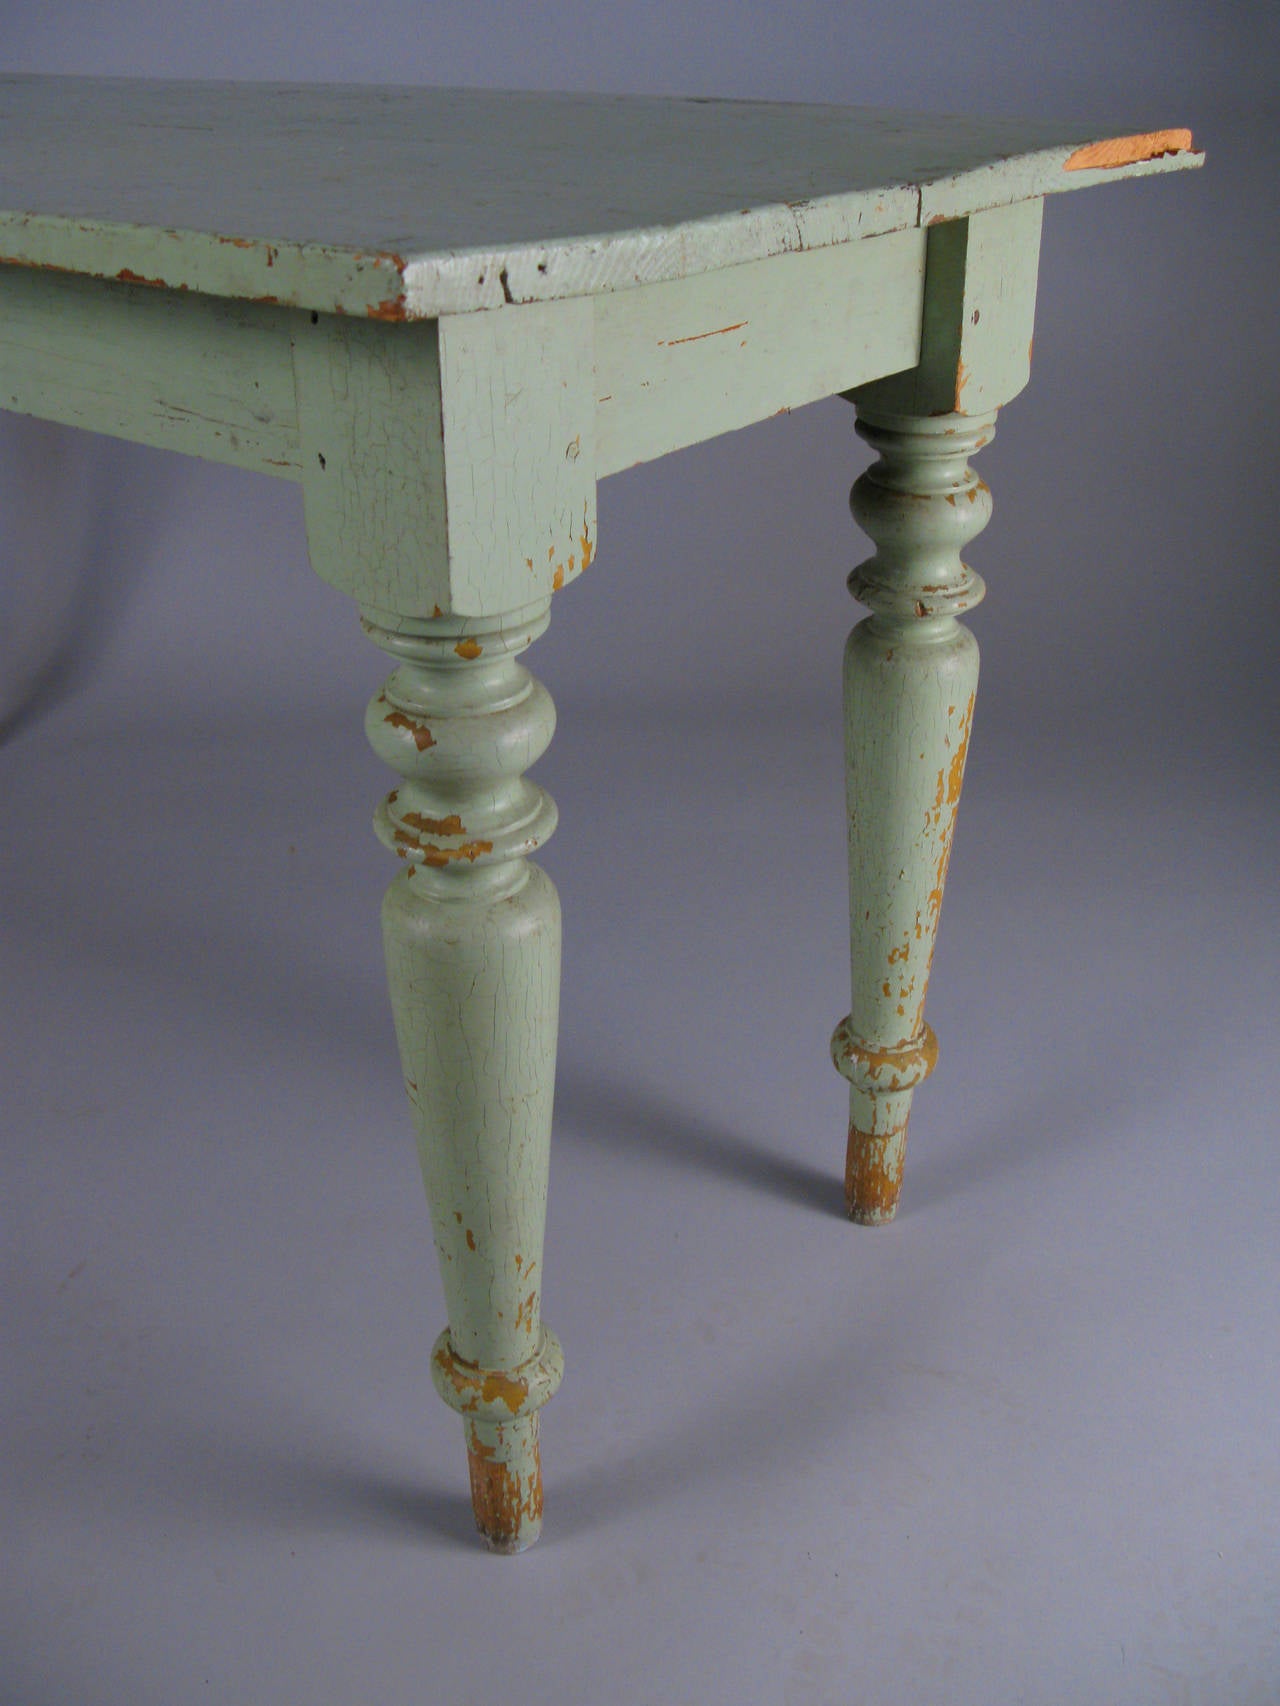 19th Century Country Table in Original Green Paint 1